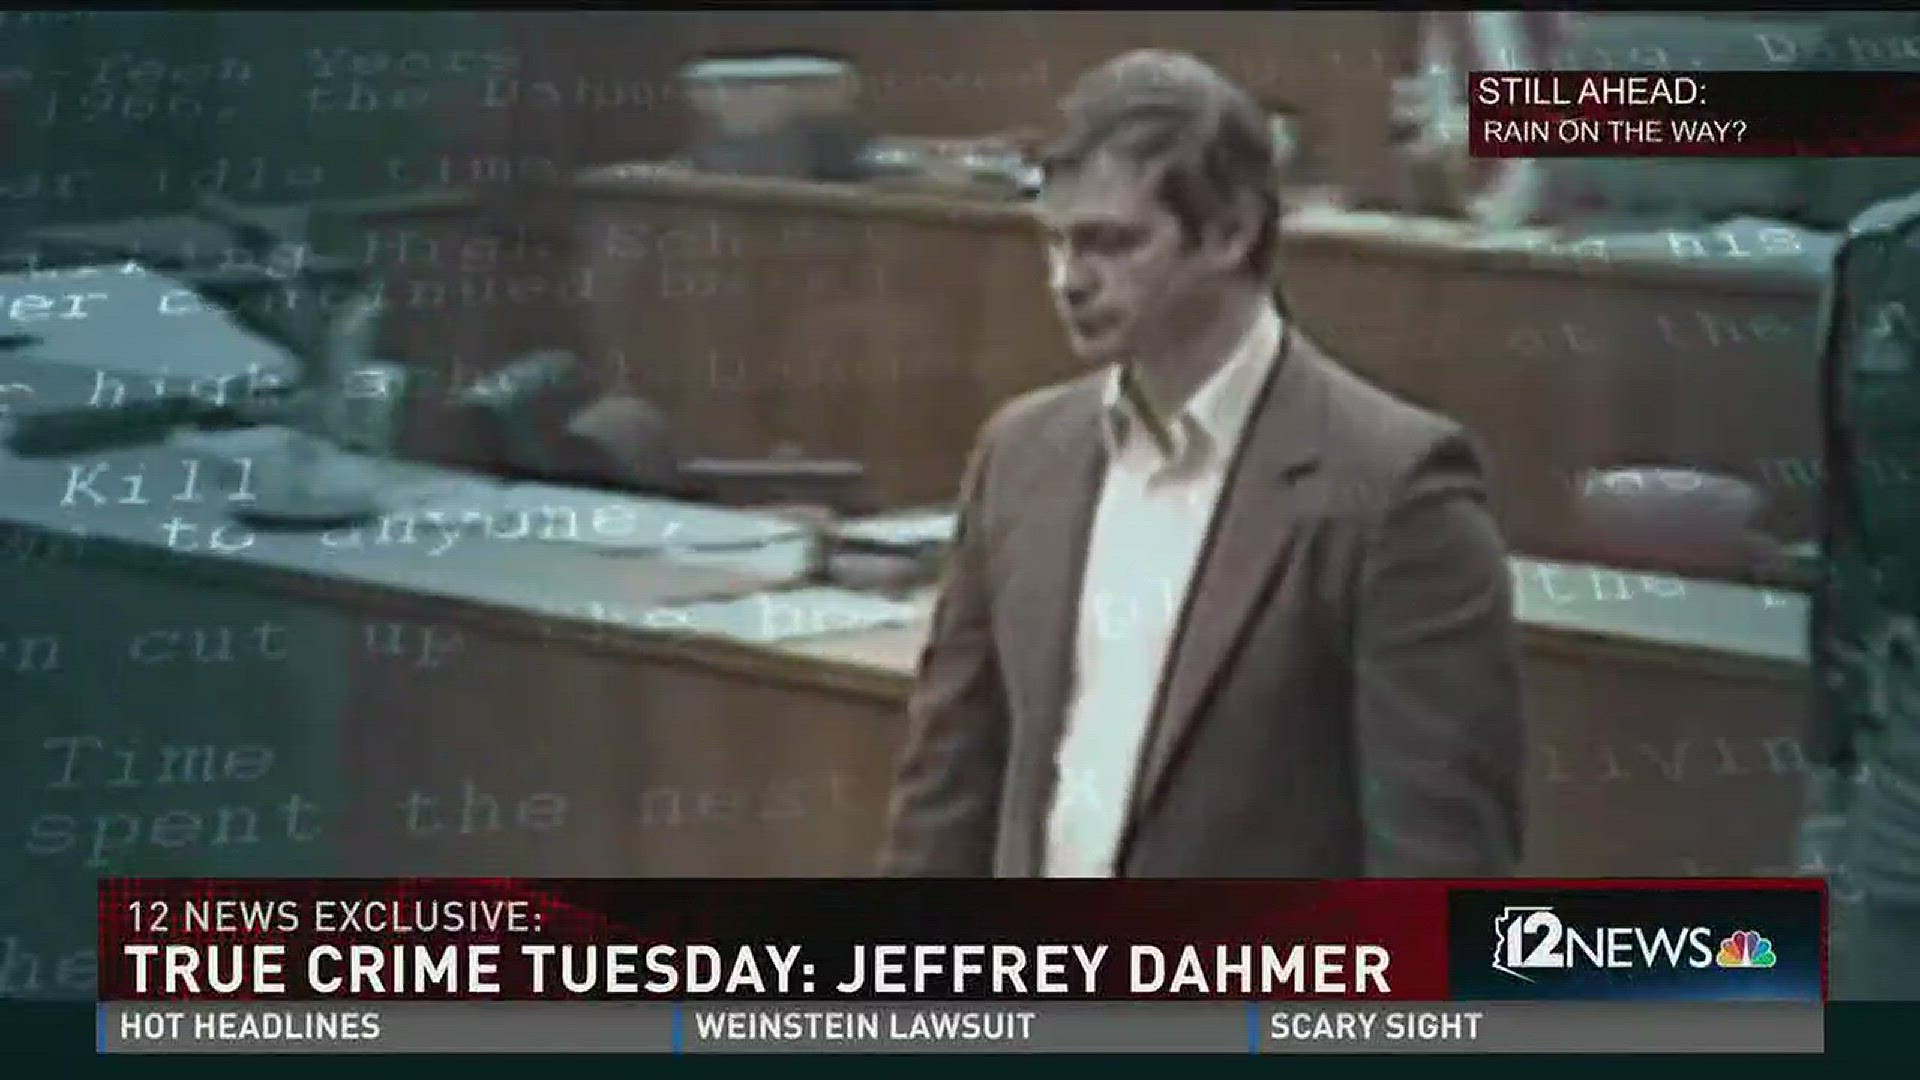 Notorious serial killer Jeffrey Dahmer terrorized a community for 13 years until his last victim Tracy Edwards escaped Dahmer's apartment and flagged down a police car.